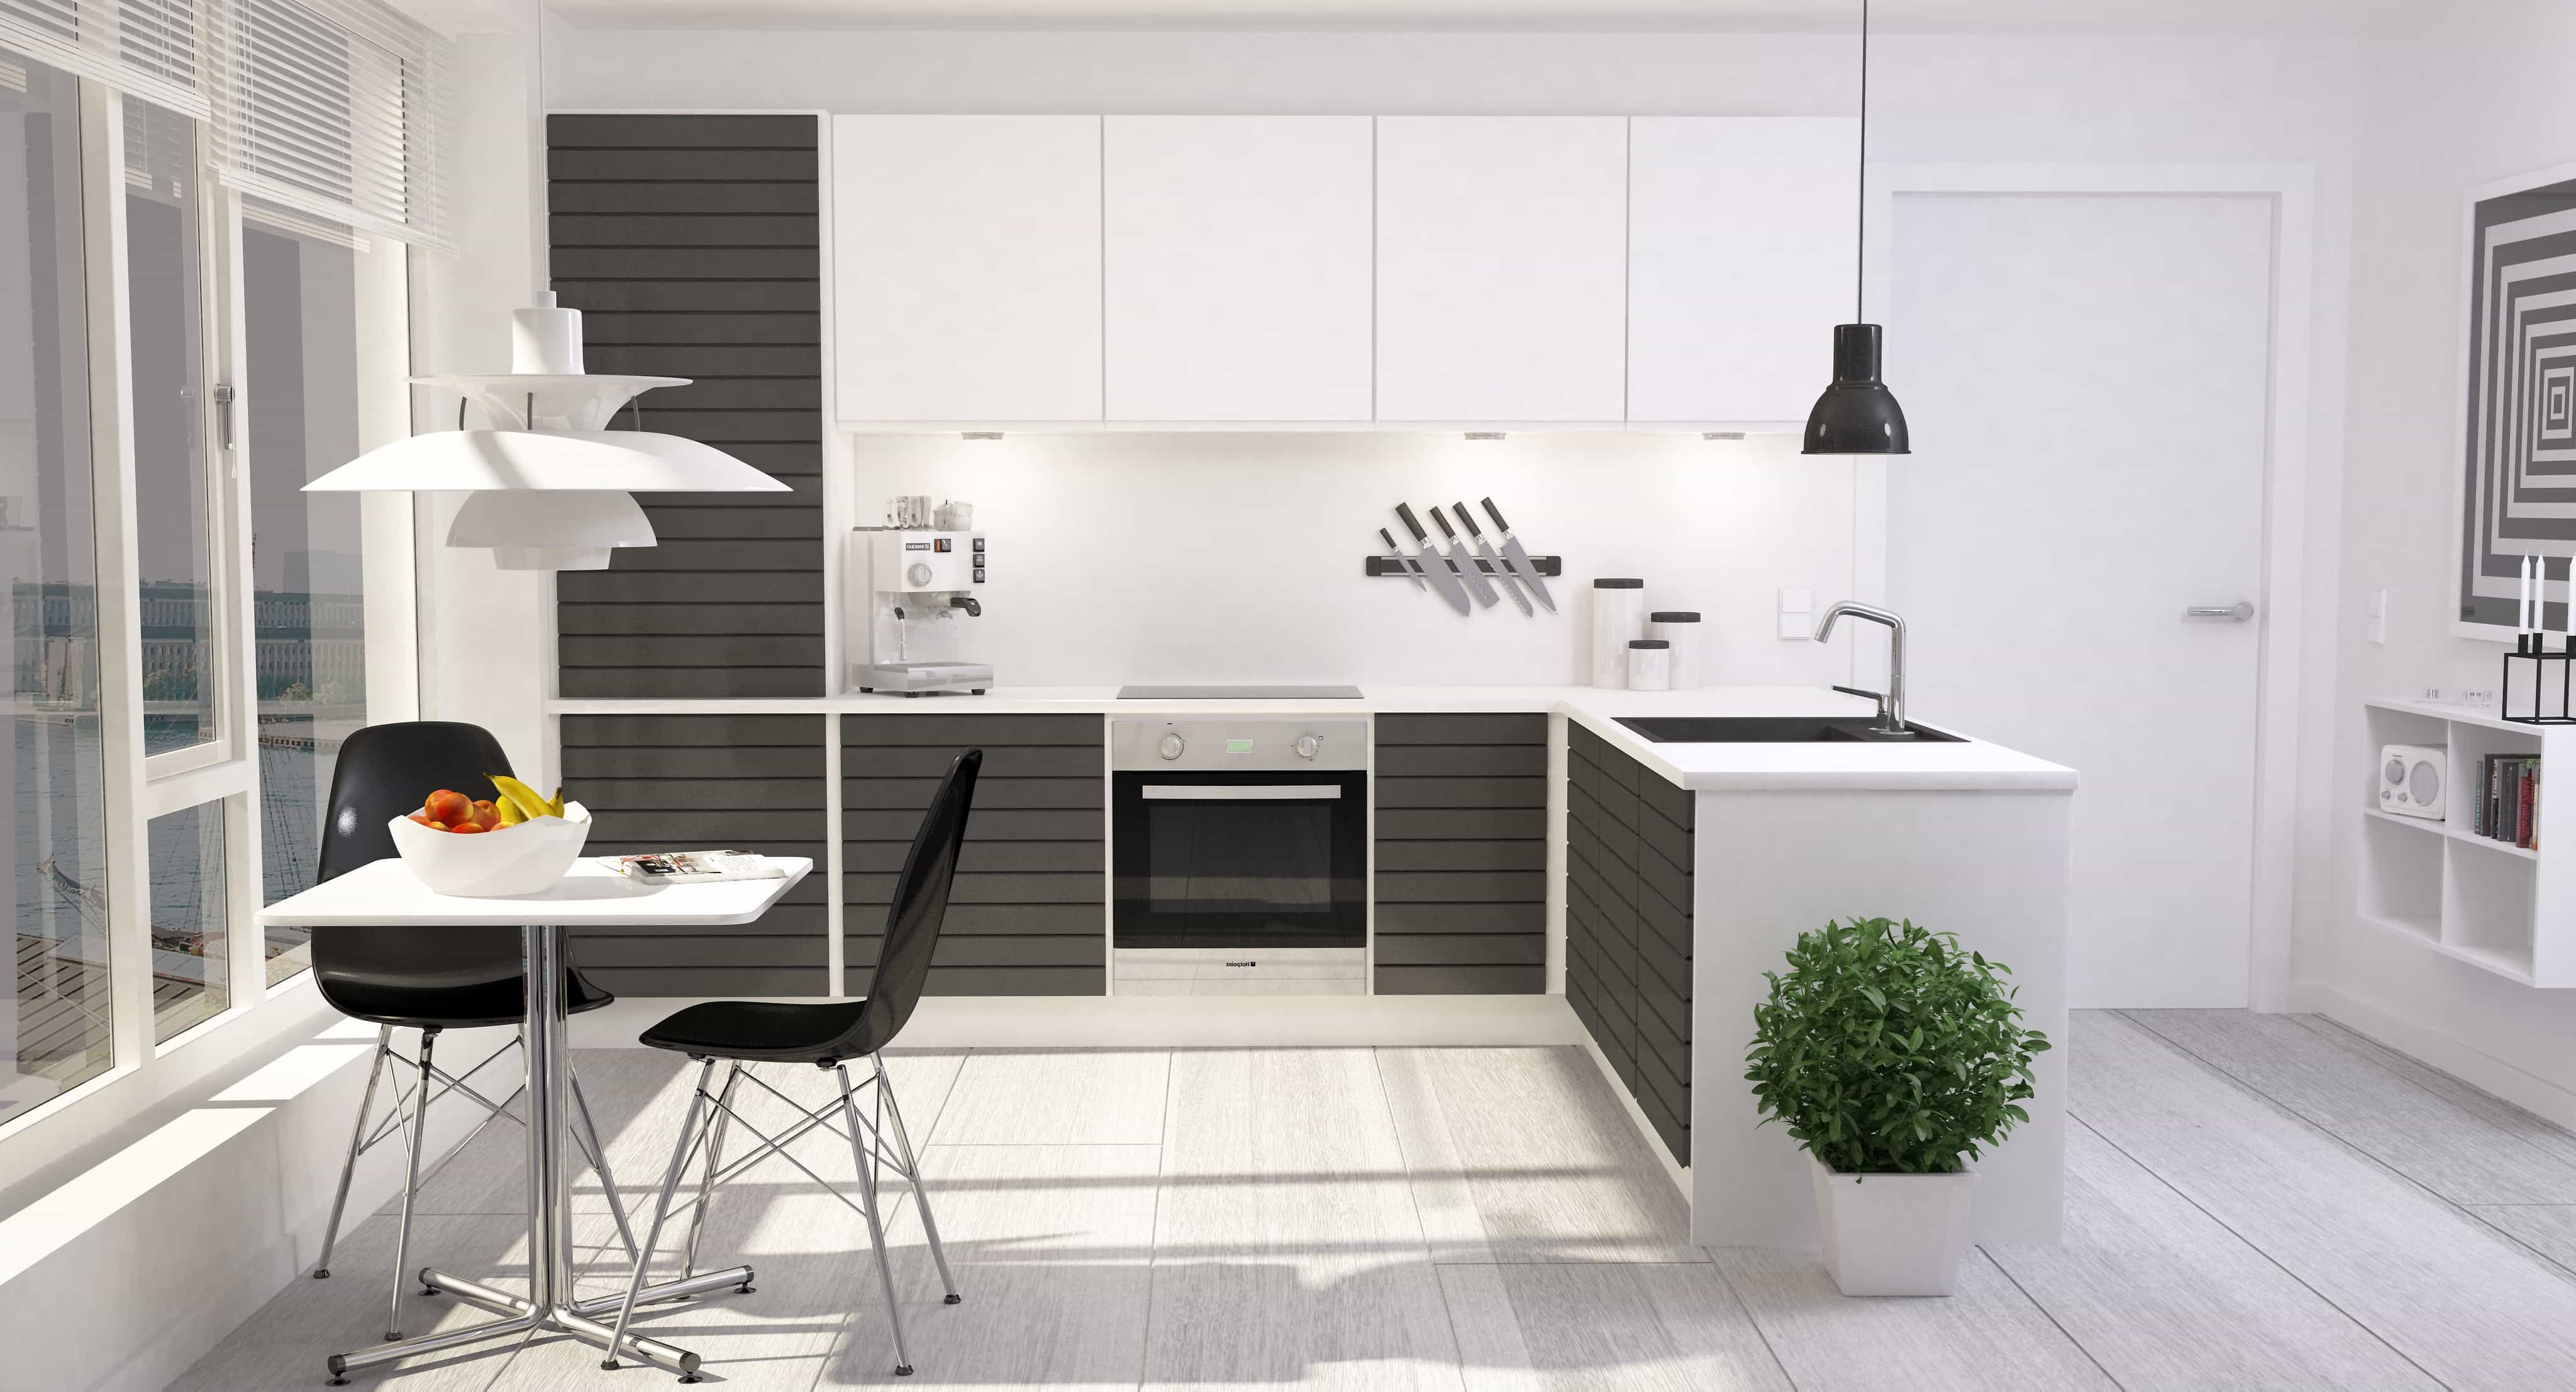 Black And White Contemporary Apartment Kitchen Interior With Flat Panel Cabinets And Small Dining Table And Chairs (View 30 of 39)